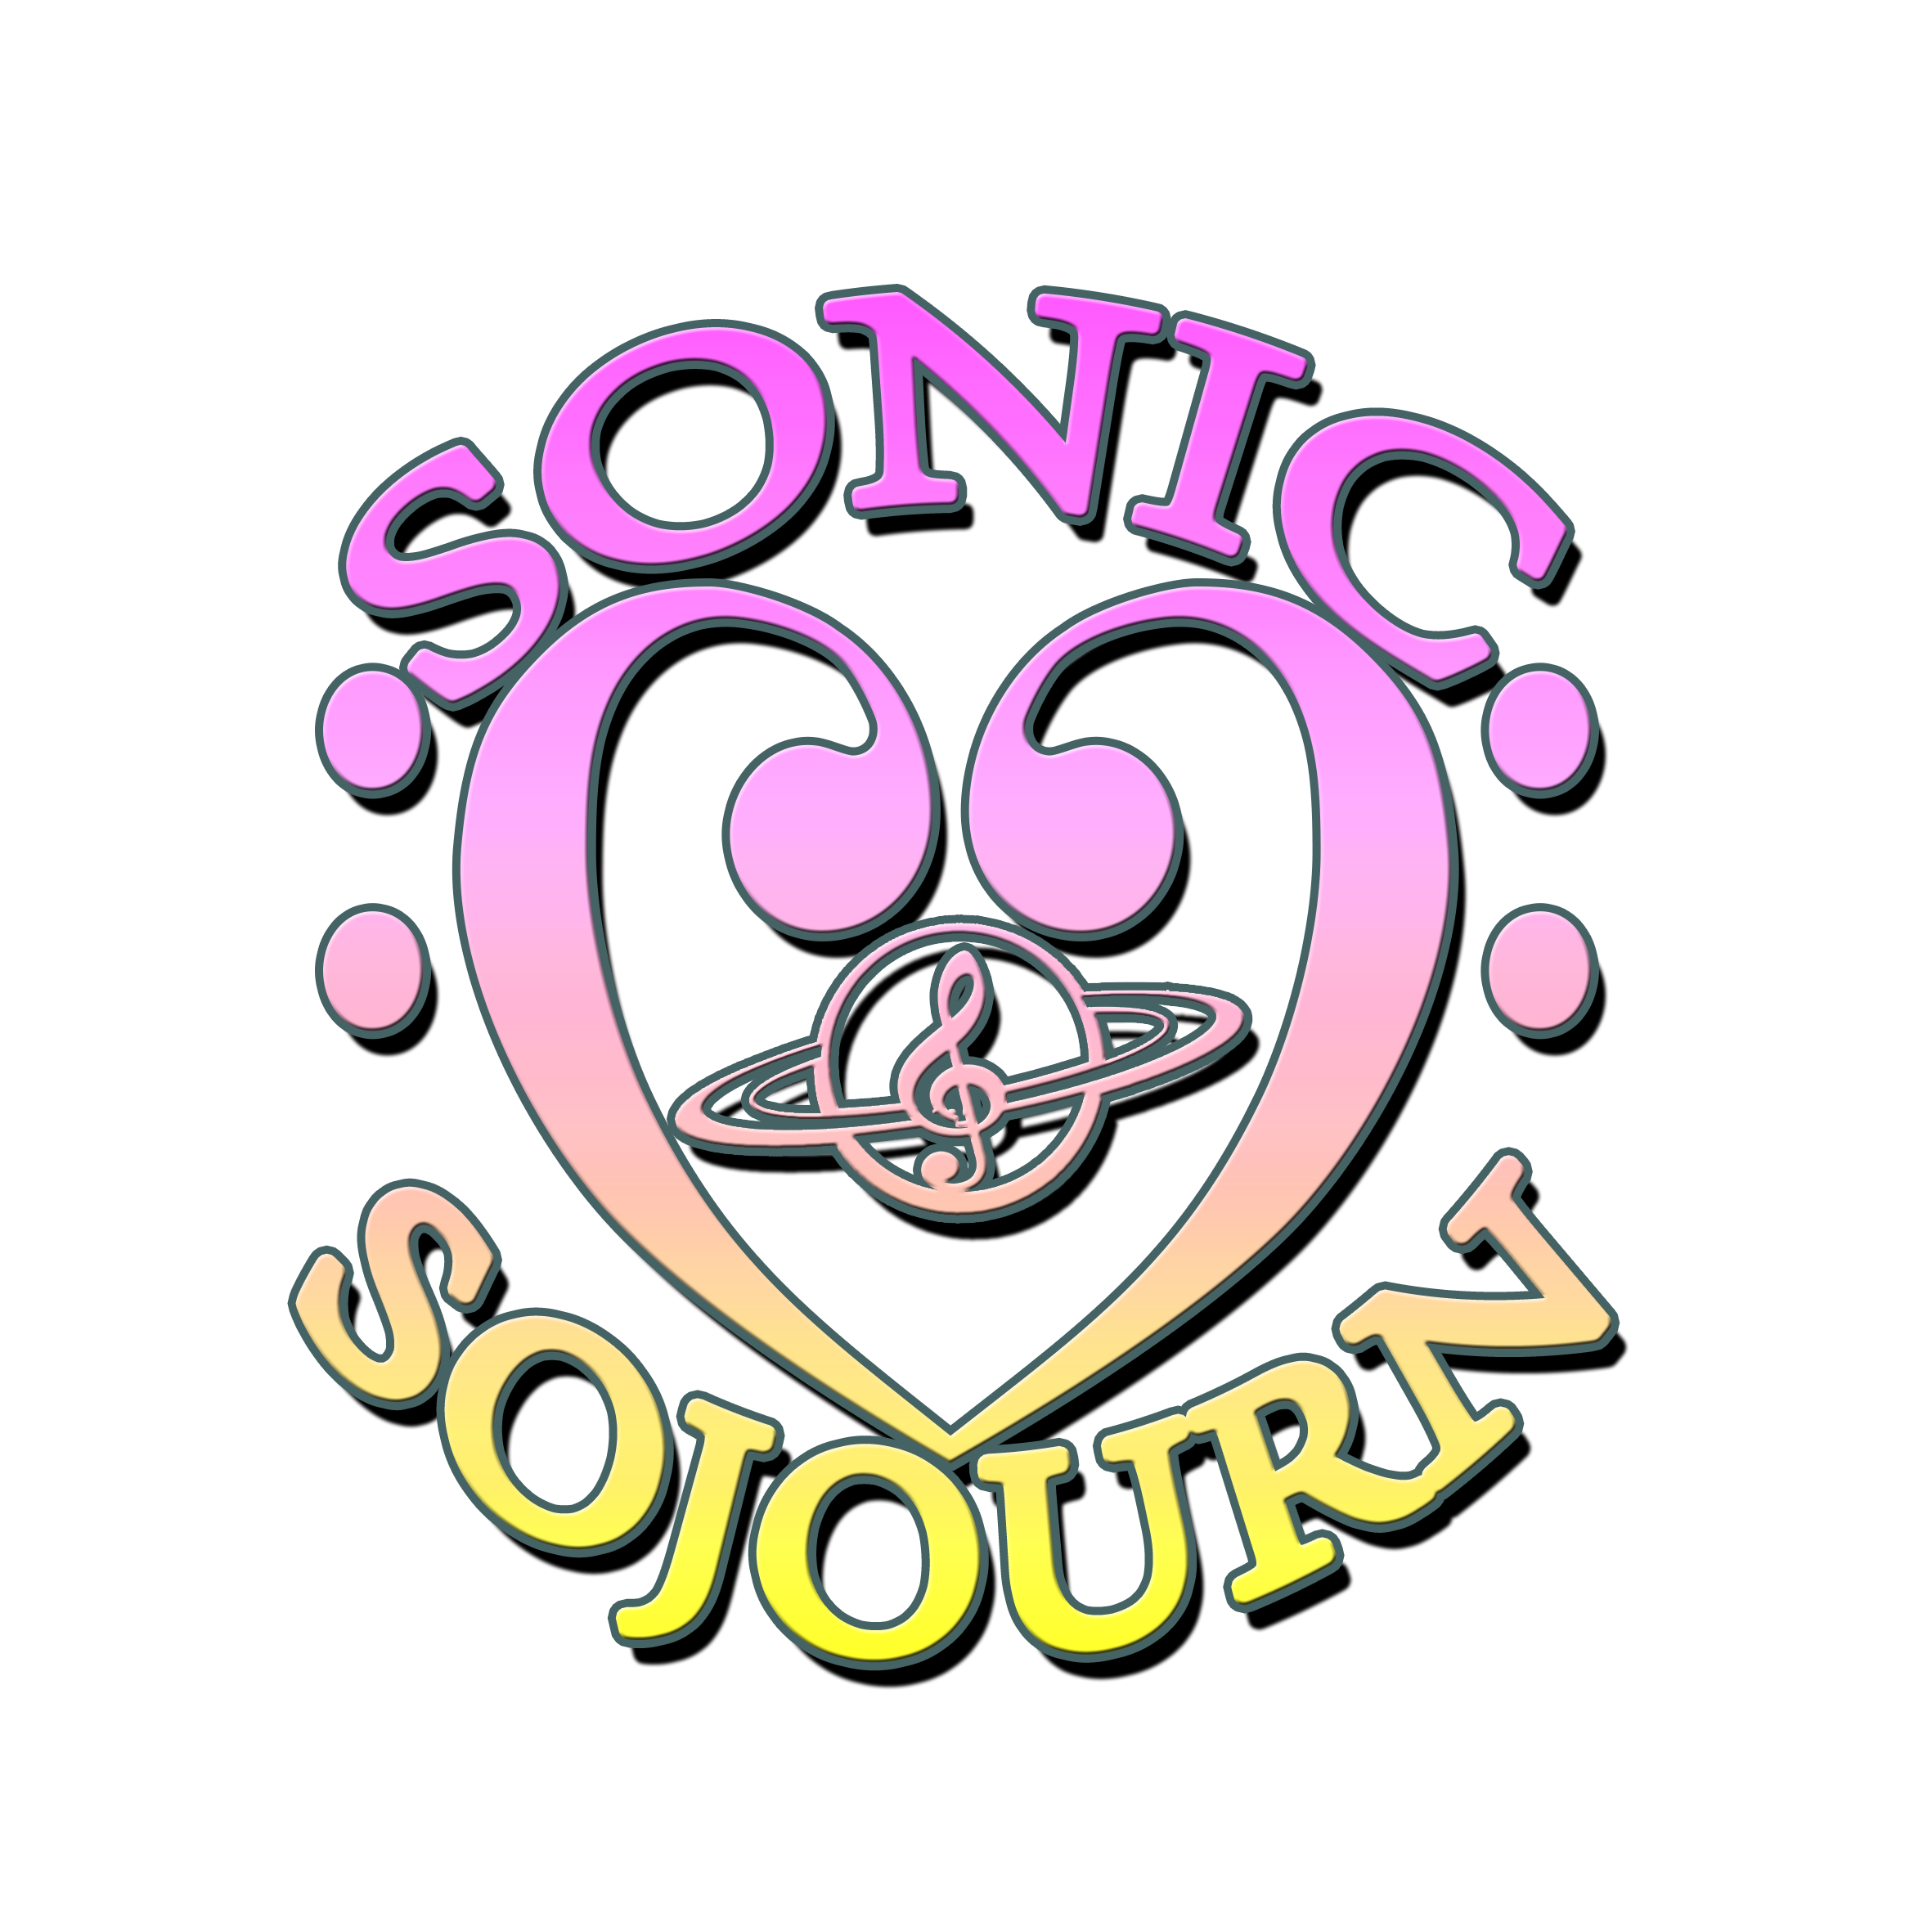 SONIC SOJOURN